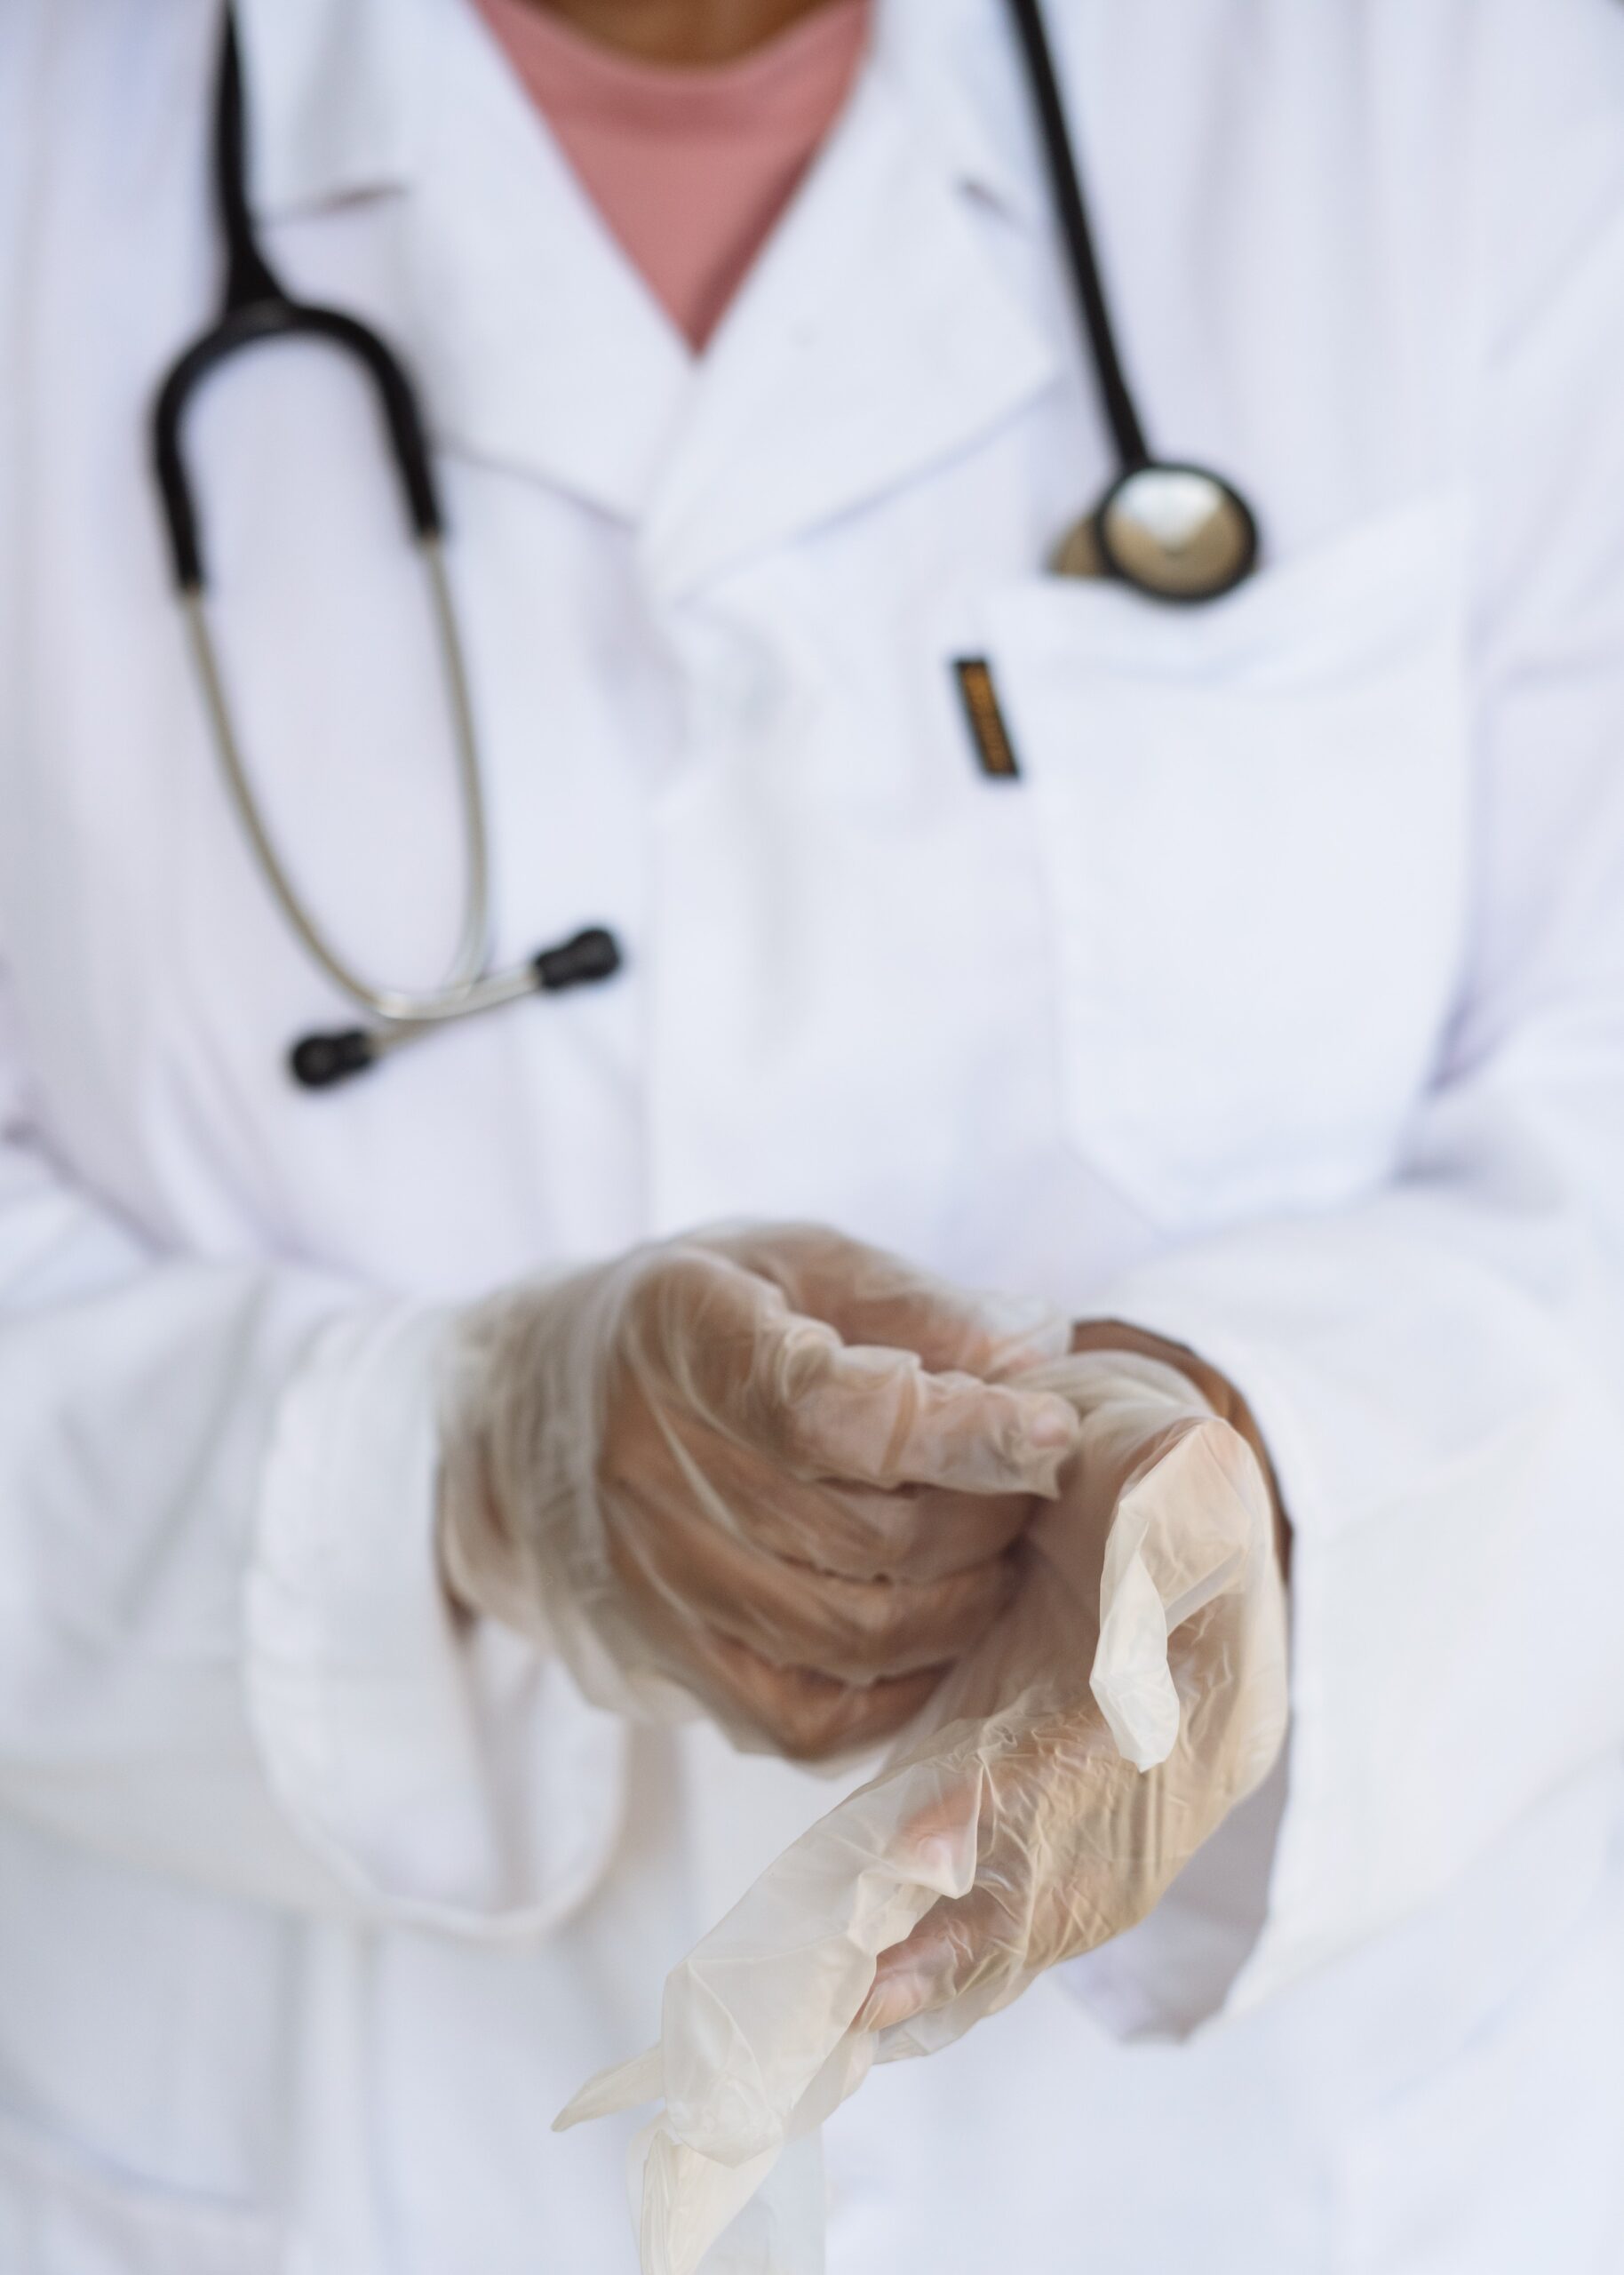 A doctor wearing gloves image